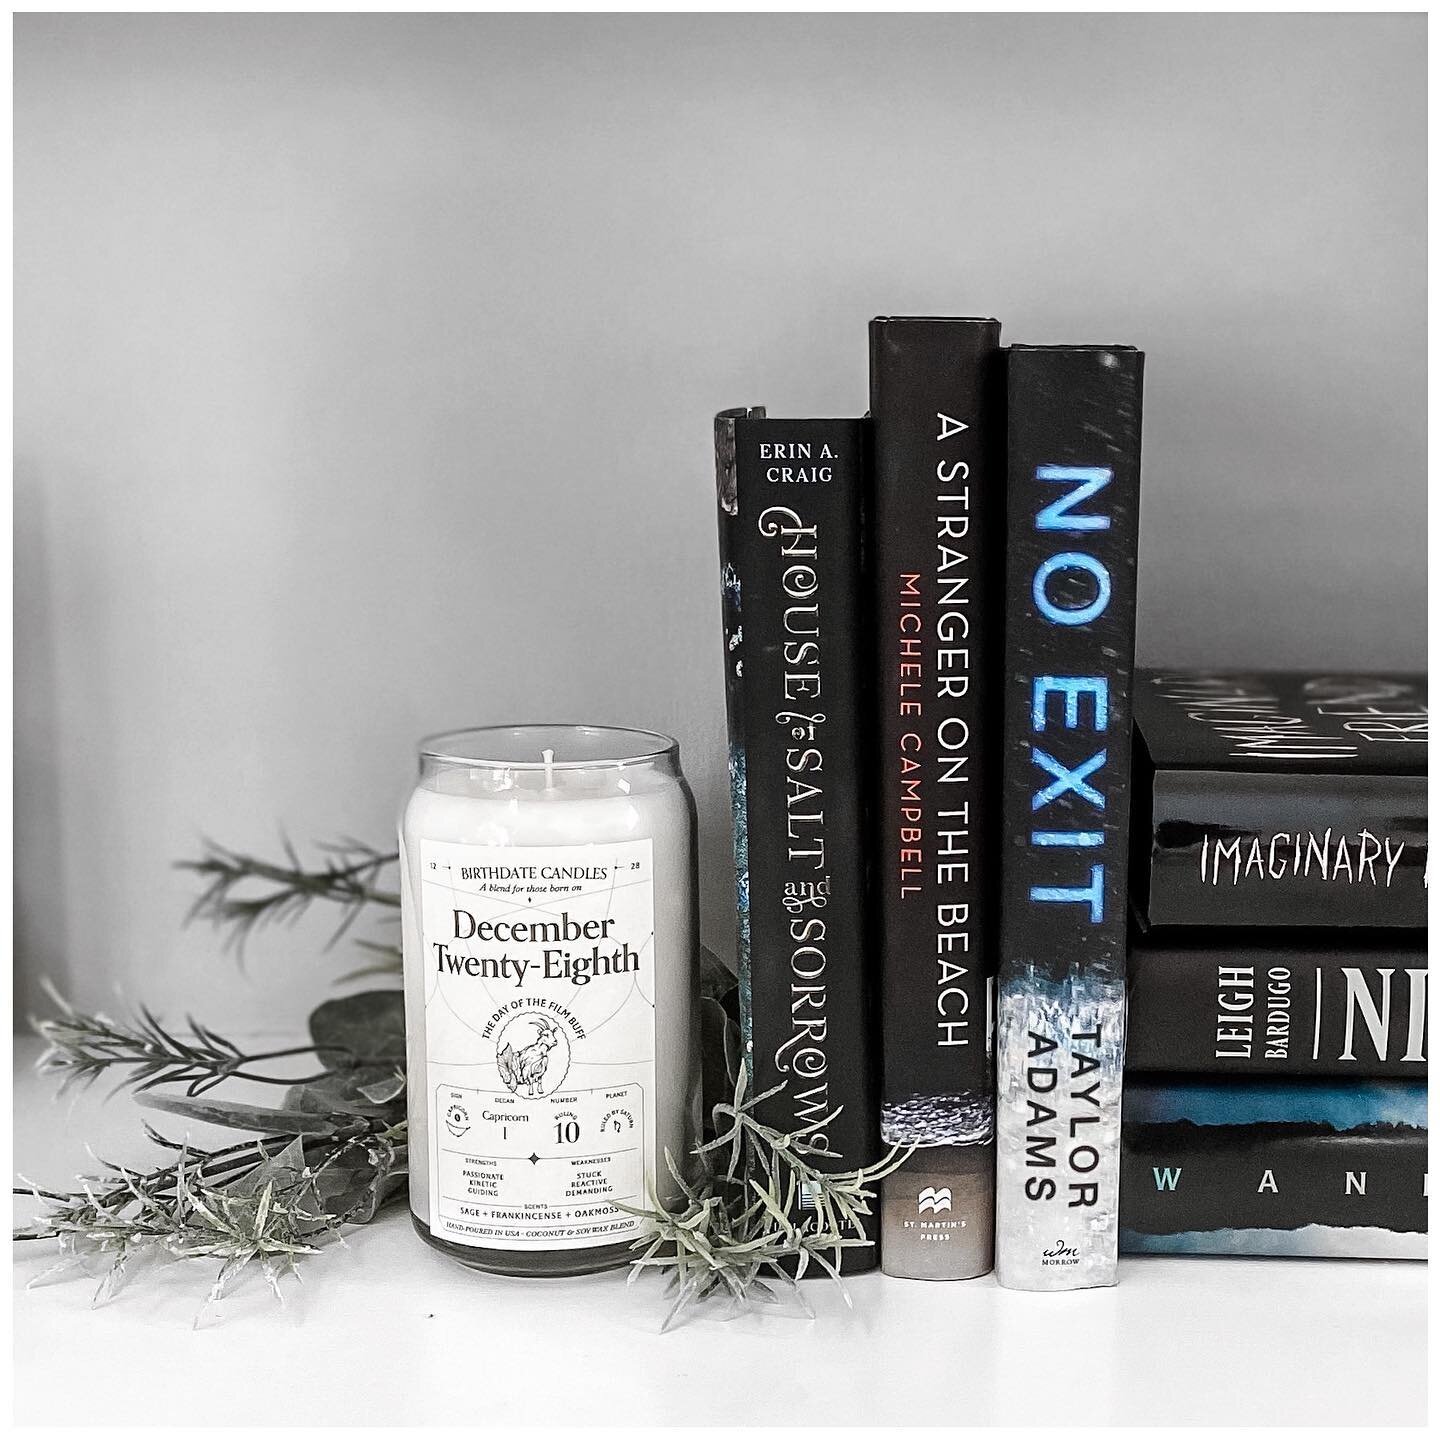 Still have moving boxes scattered around the house, but my books are 100% unpacked so like...the essentials are put away, right??

One of my favorite parts of my new shelves is this stunning candle from  @birthdatecandles &mdash; not only is it visua